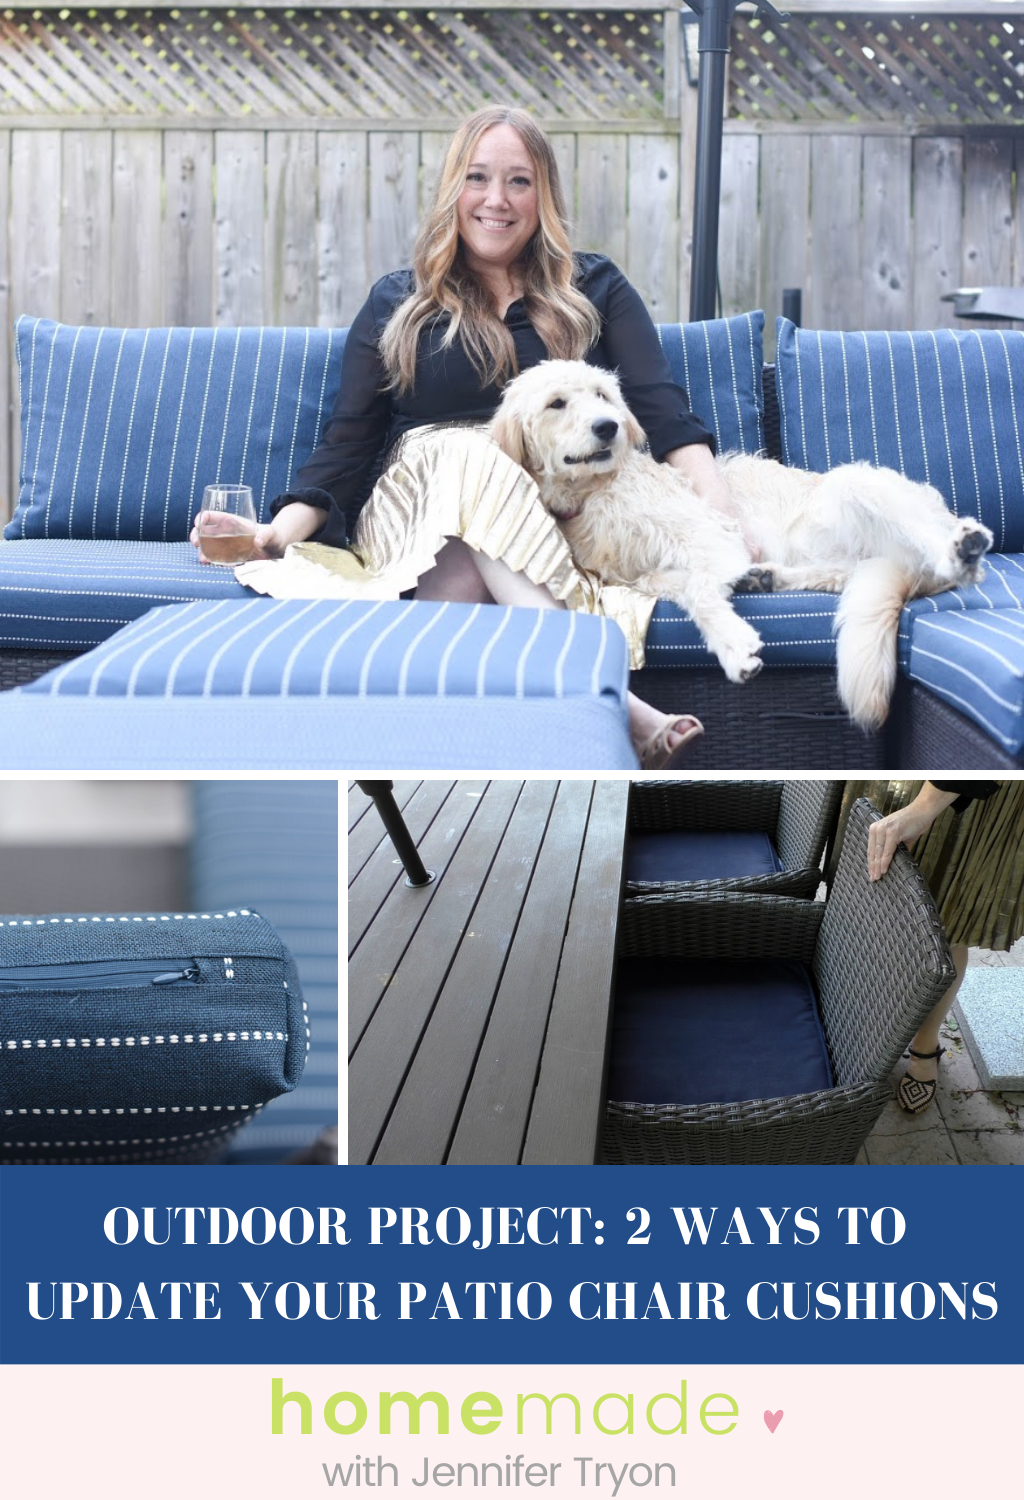 Outdoor Project: 2 Ways To Update Your Patio Chair Cushions